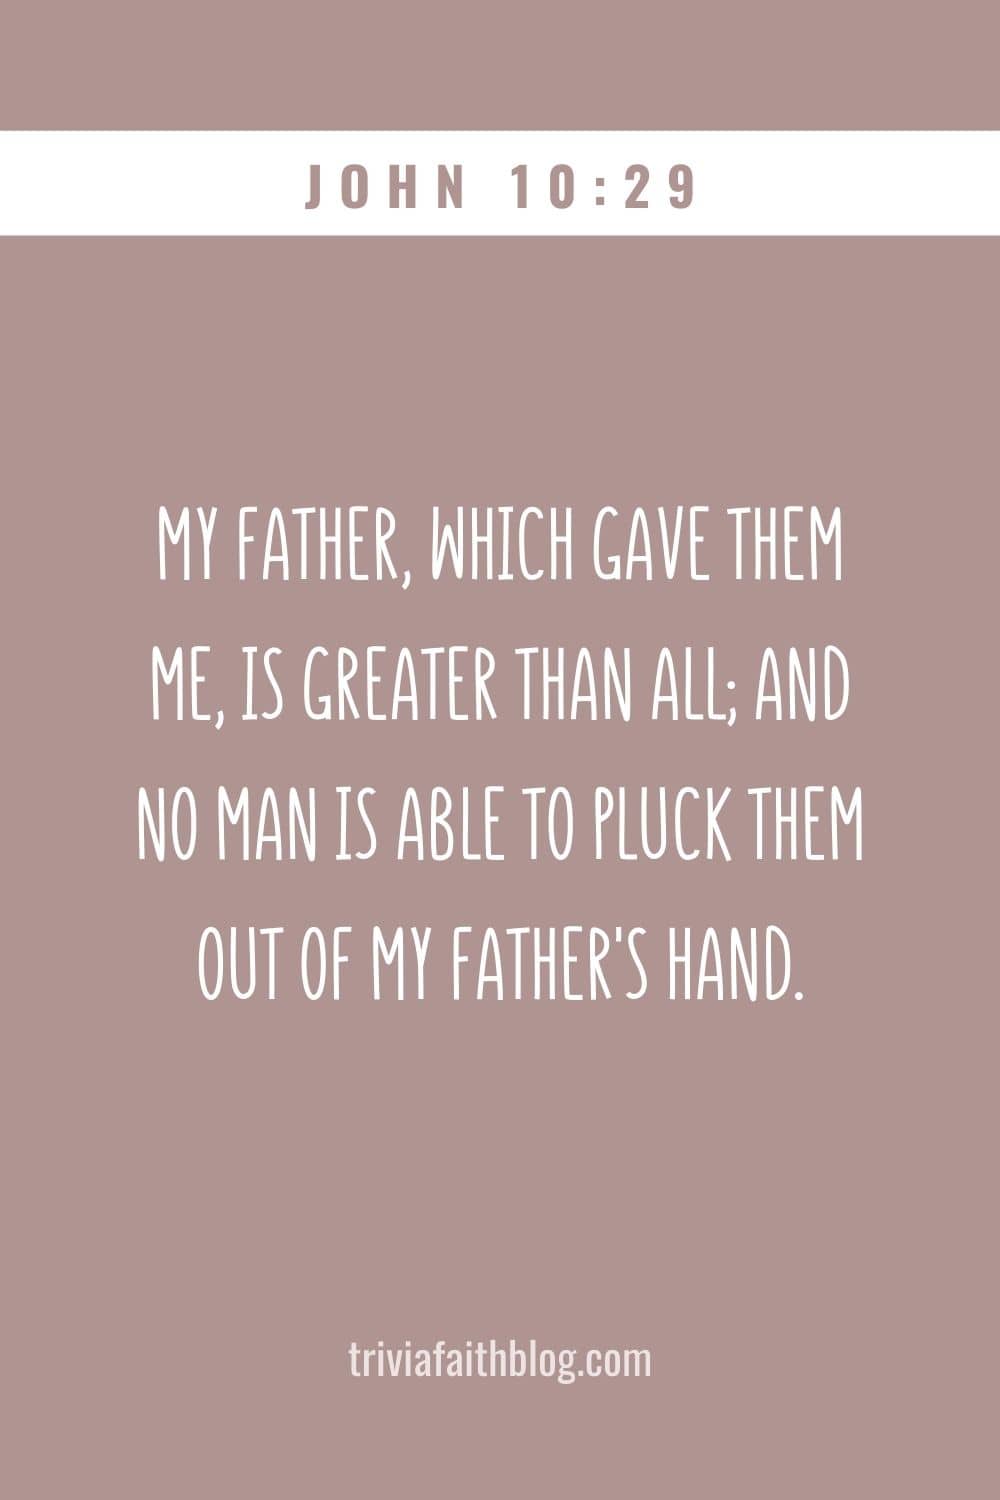 My Father, which gave them me, is greater than all; and no man is able to pluck them out of my Father's hand